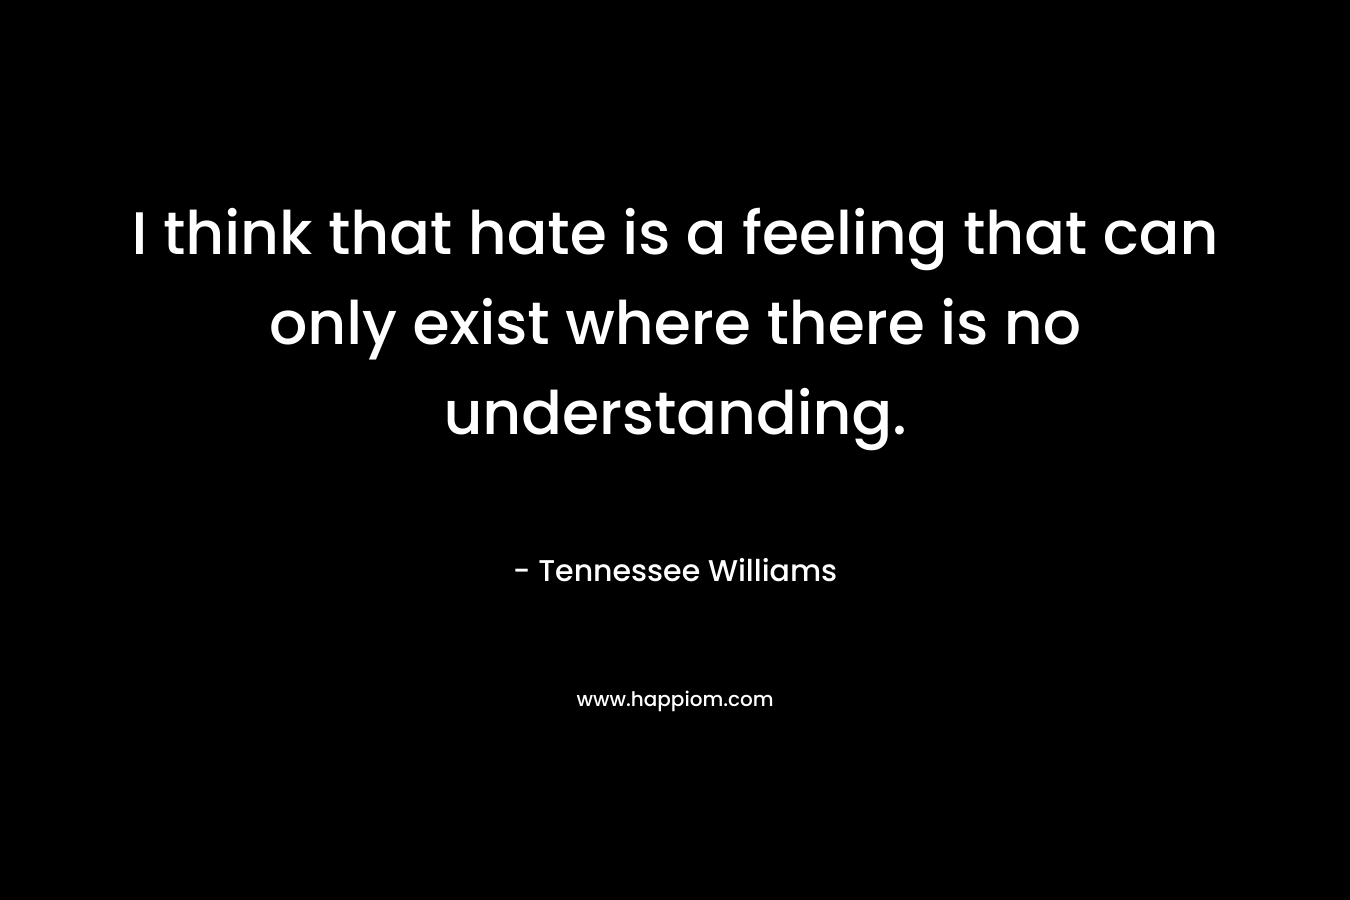 I think that hate is a feeling that can only exist where there is no understanding. – Tennessee Williams